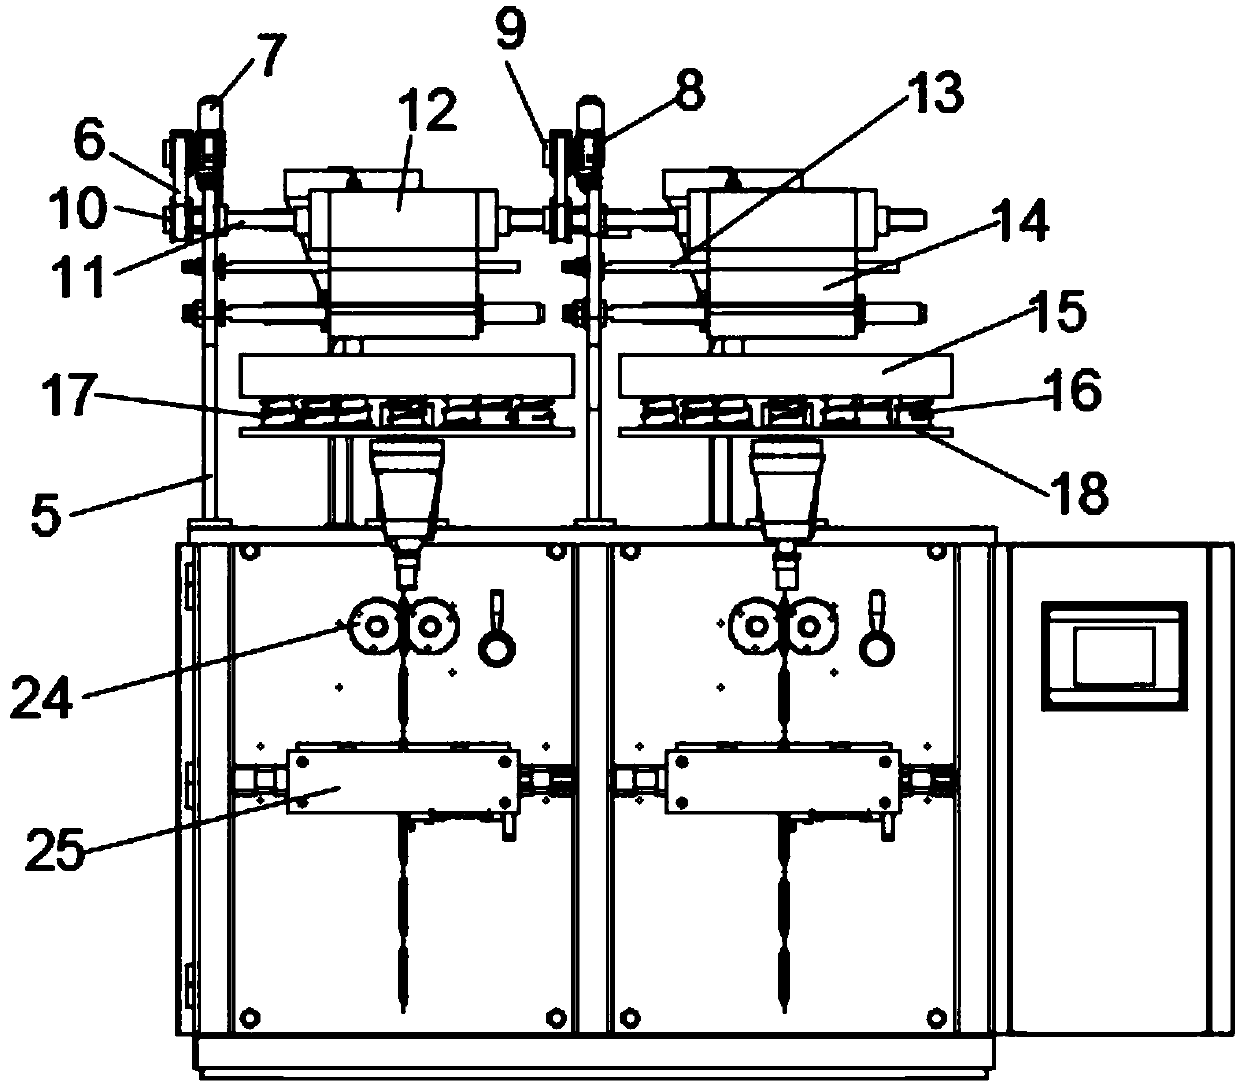 Automatic granule bagging device for food processing